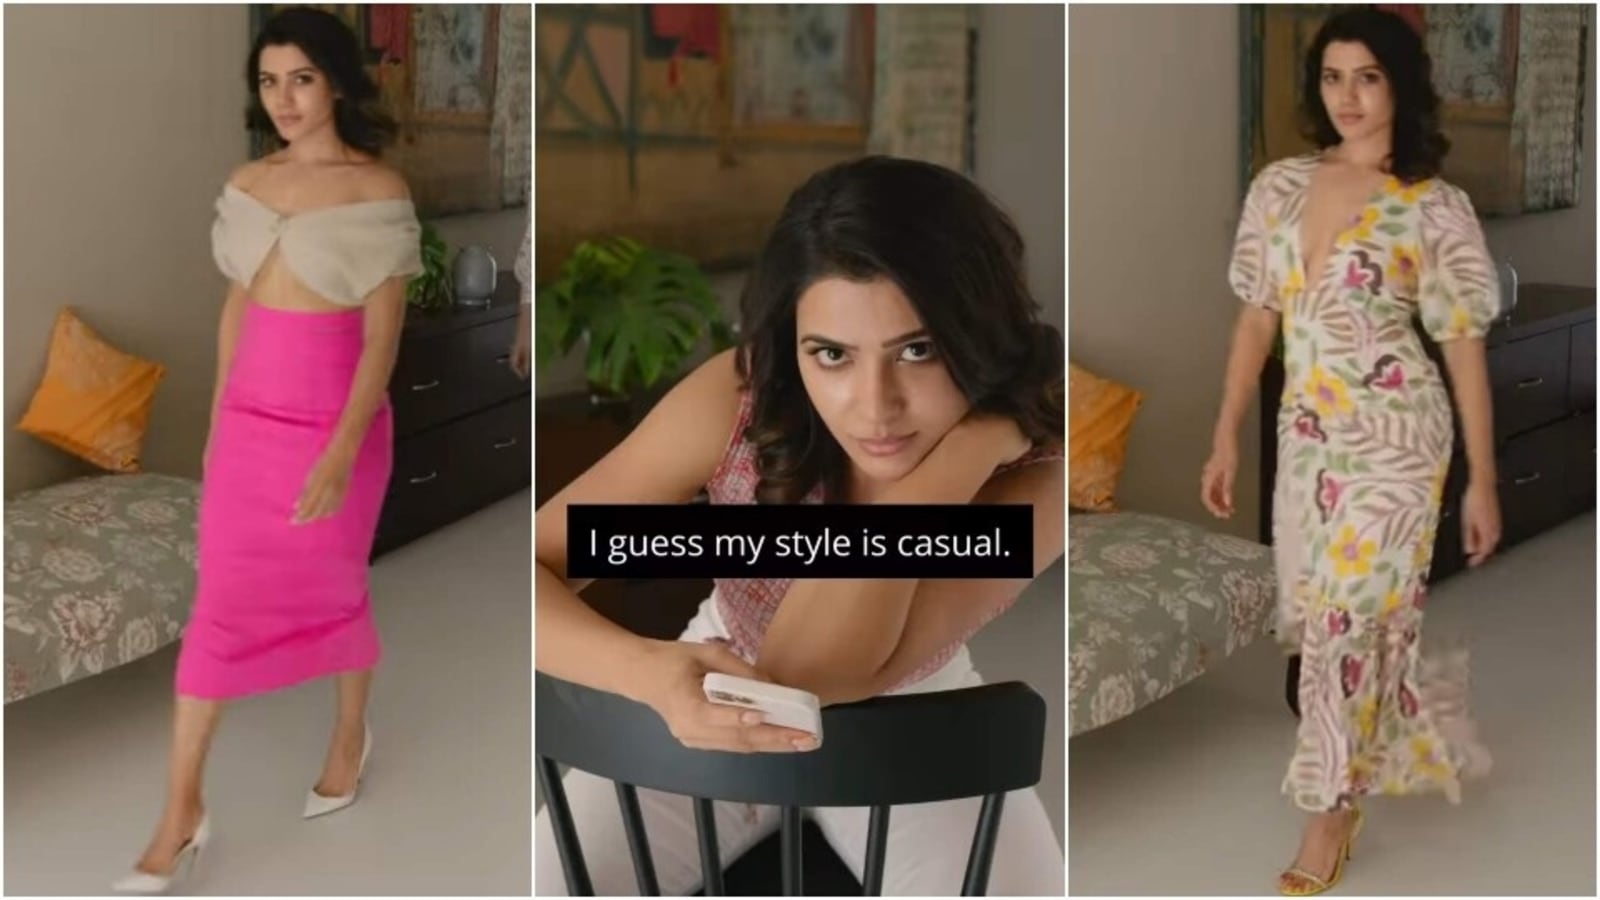 Samantha Www Xxx Video - Samantha Akkineni shows off her 'casual' looks in new video, we love them  all | Fashion Trends - Hindustan Times